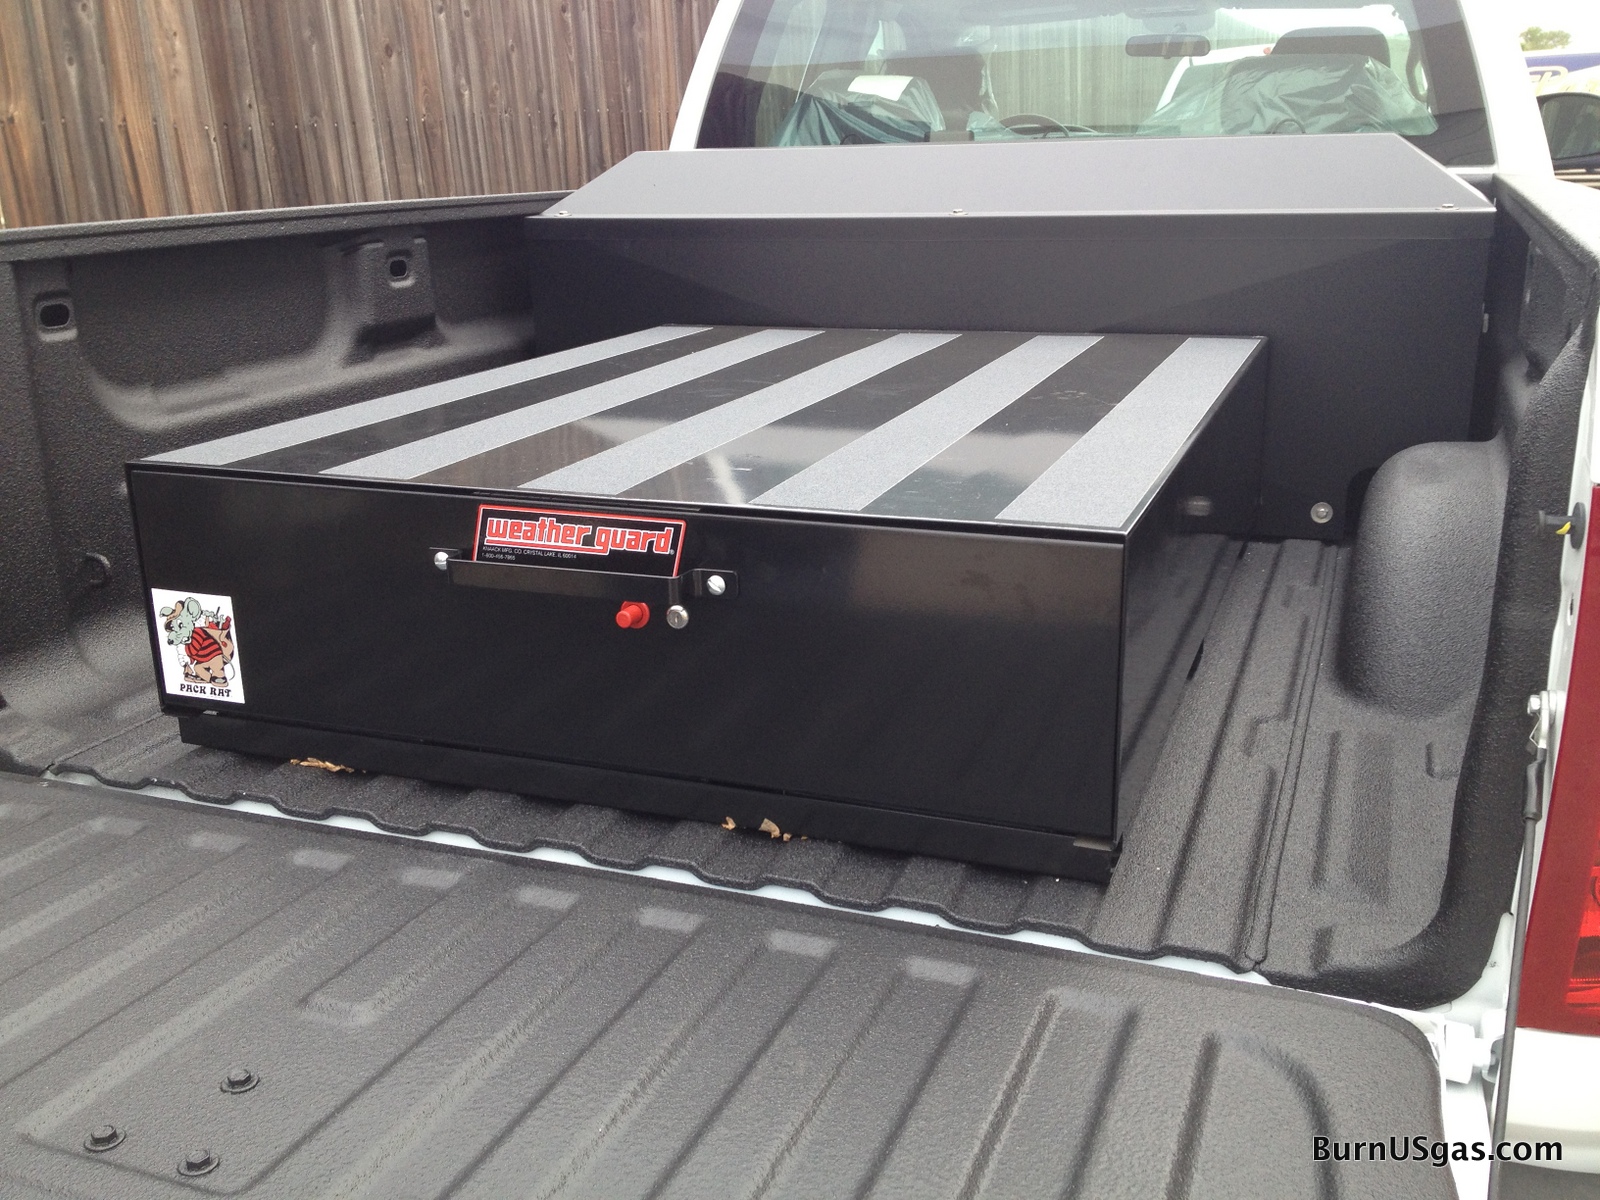 Burn United States gas: Truck bed storage considerations